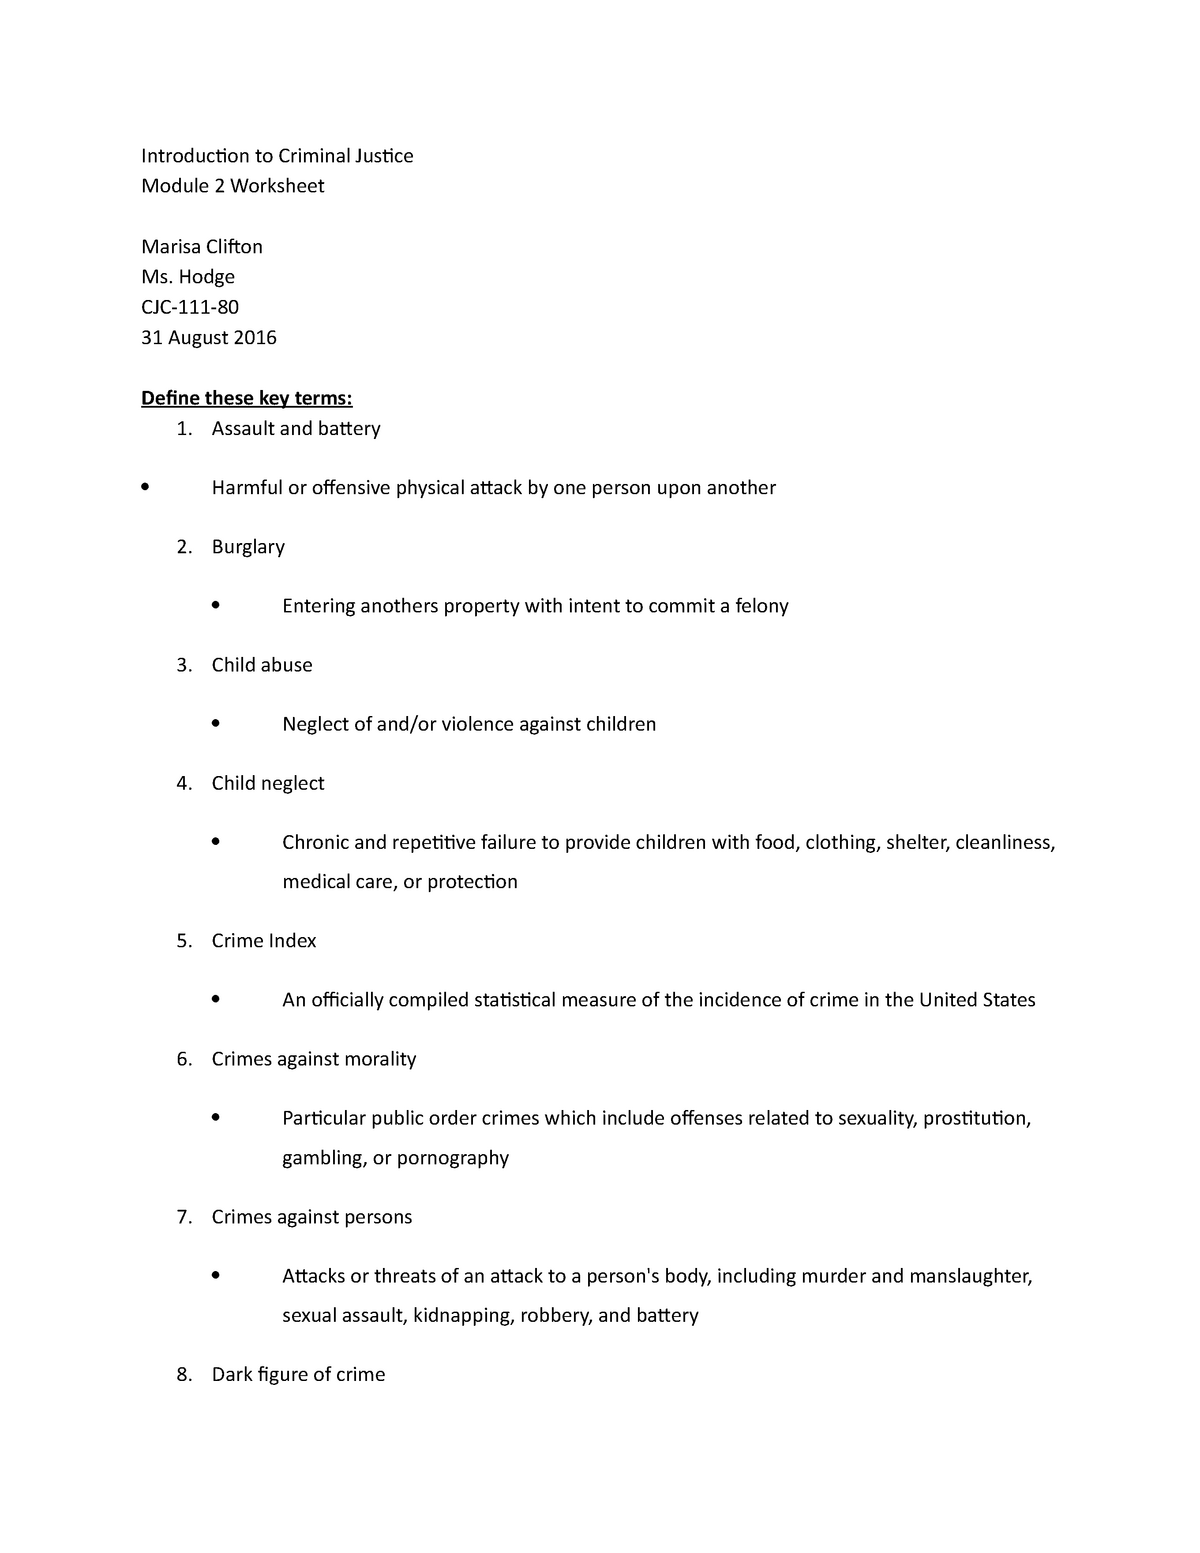 Chapter 2 worksheet Introduction to Criminal Justice Module 2